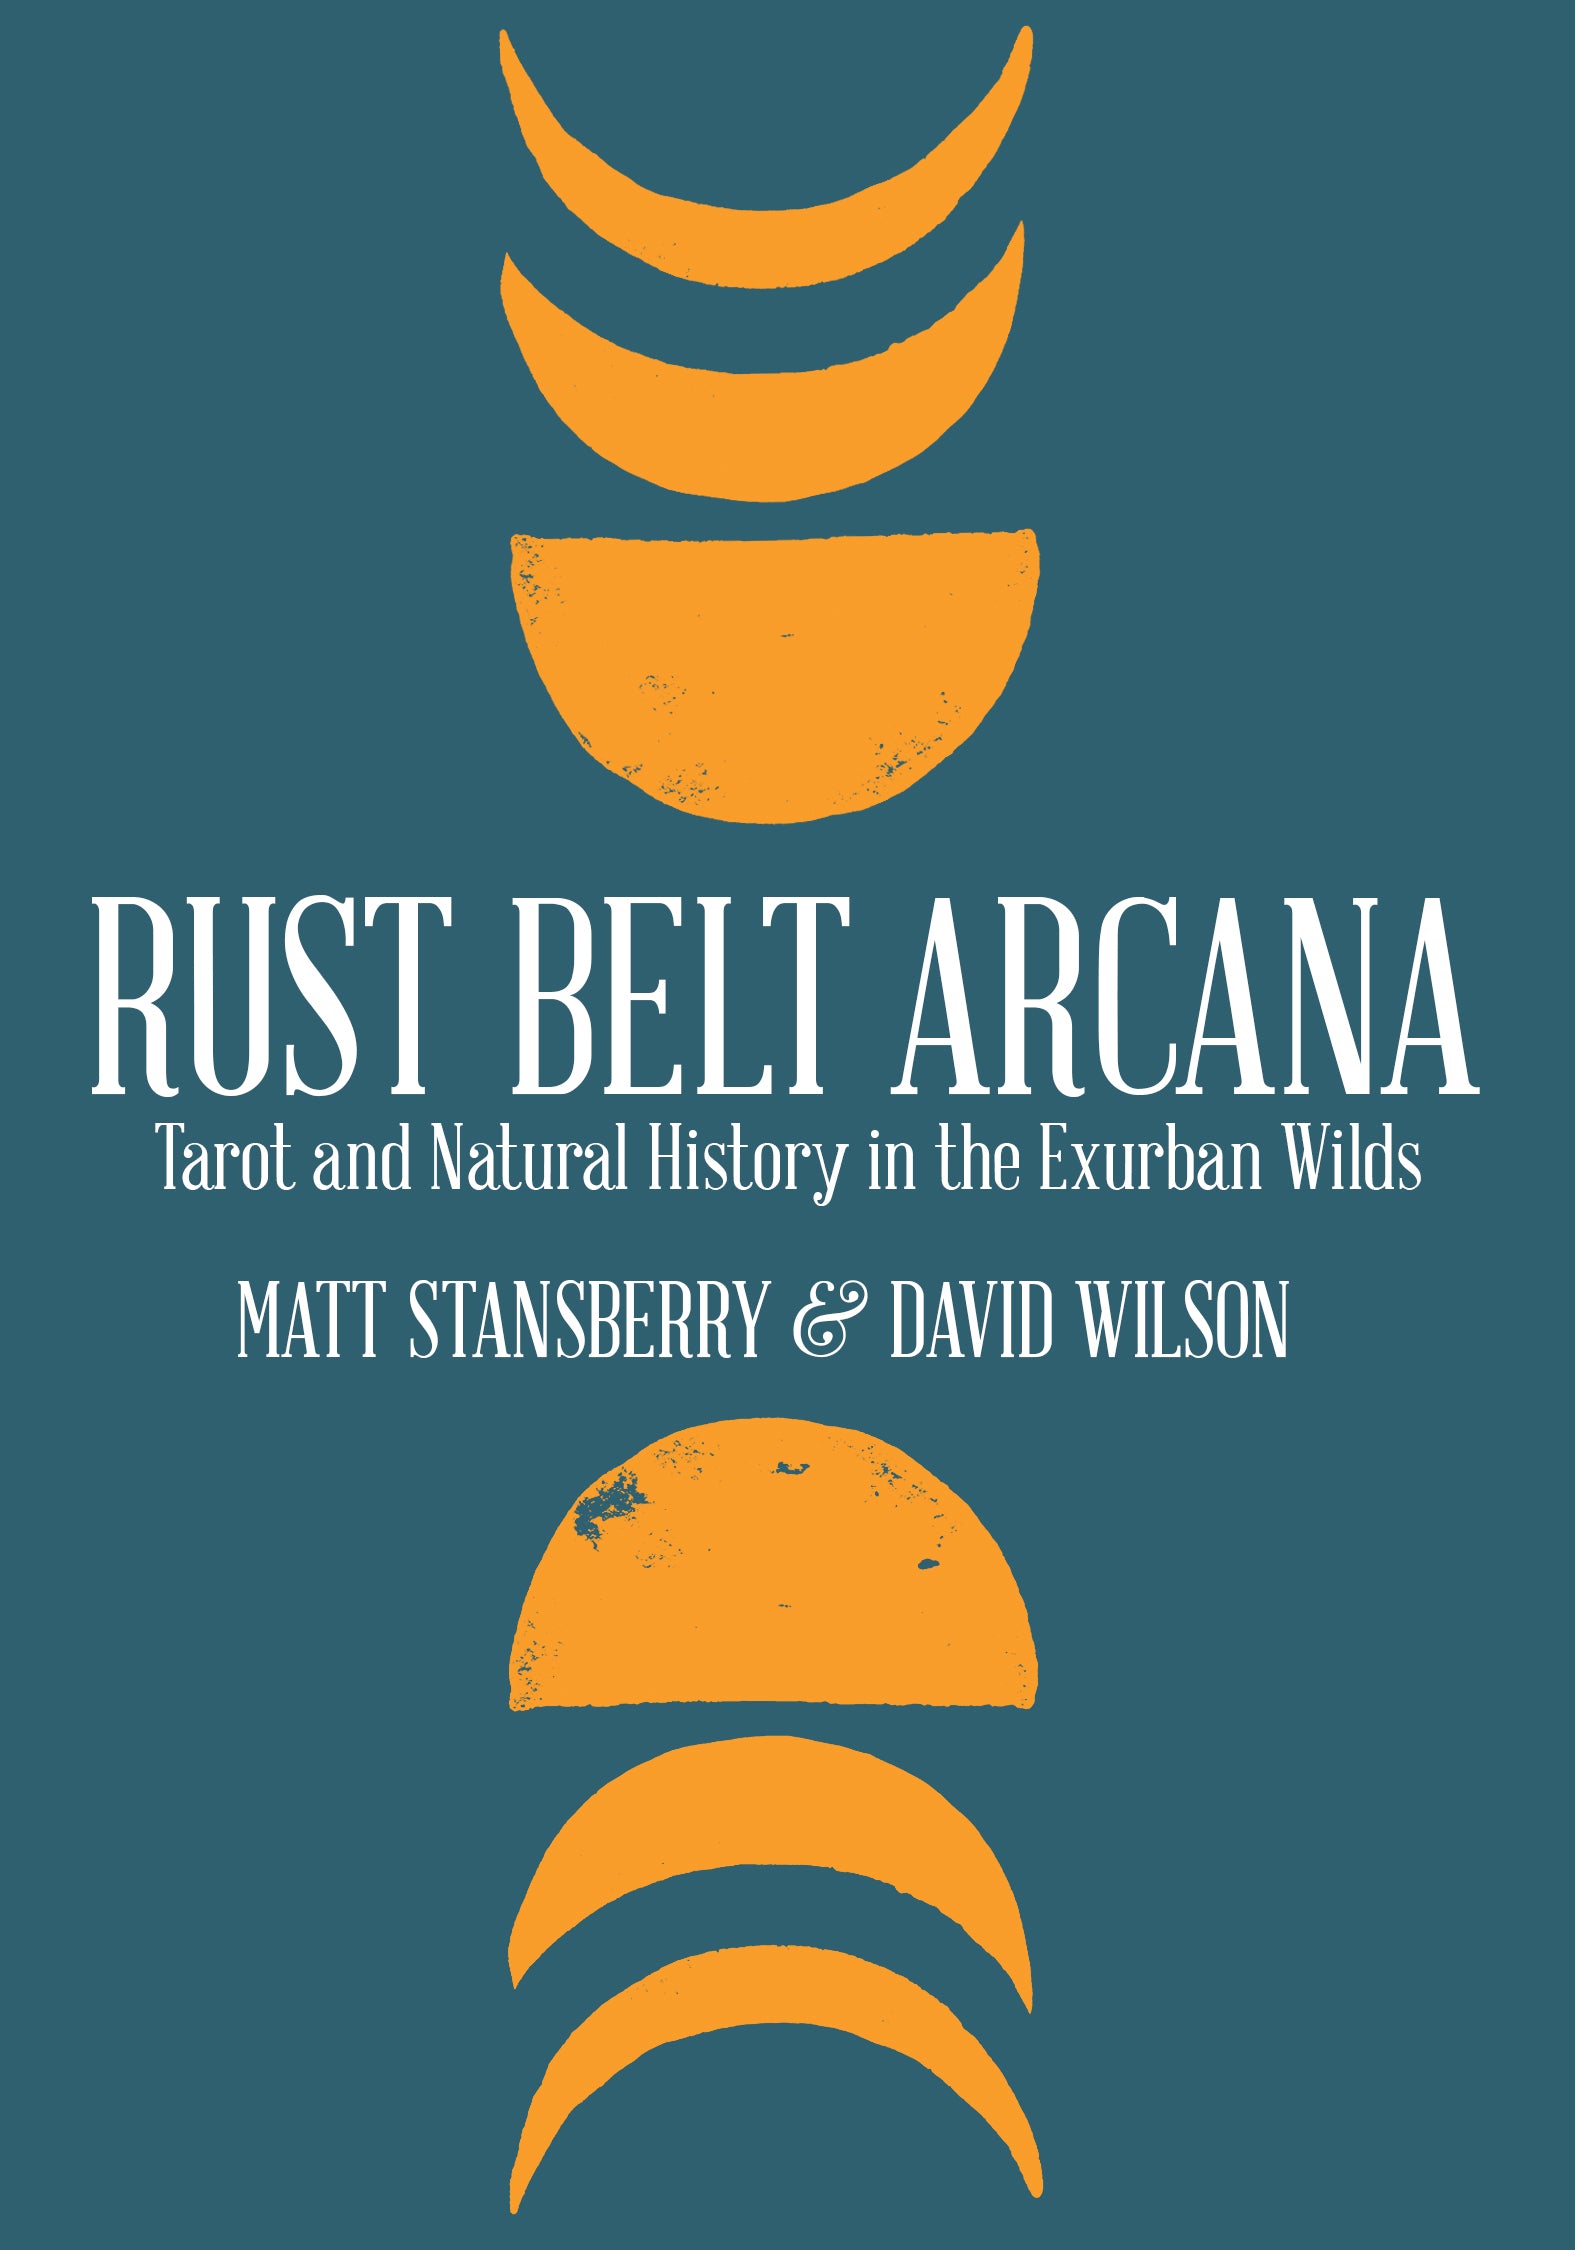 Rust Belt Arcana: Tarot and Natural History in the Exurban Wilds - Belt Publishing